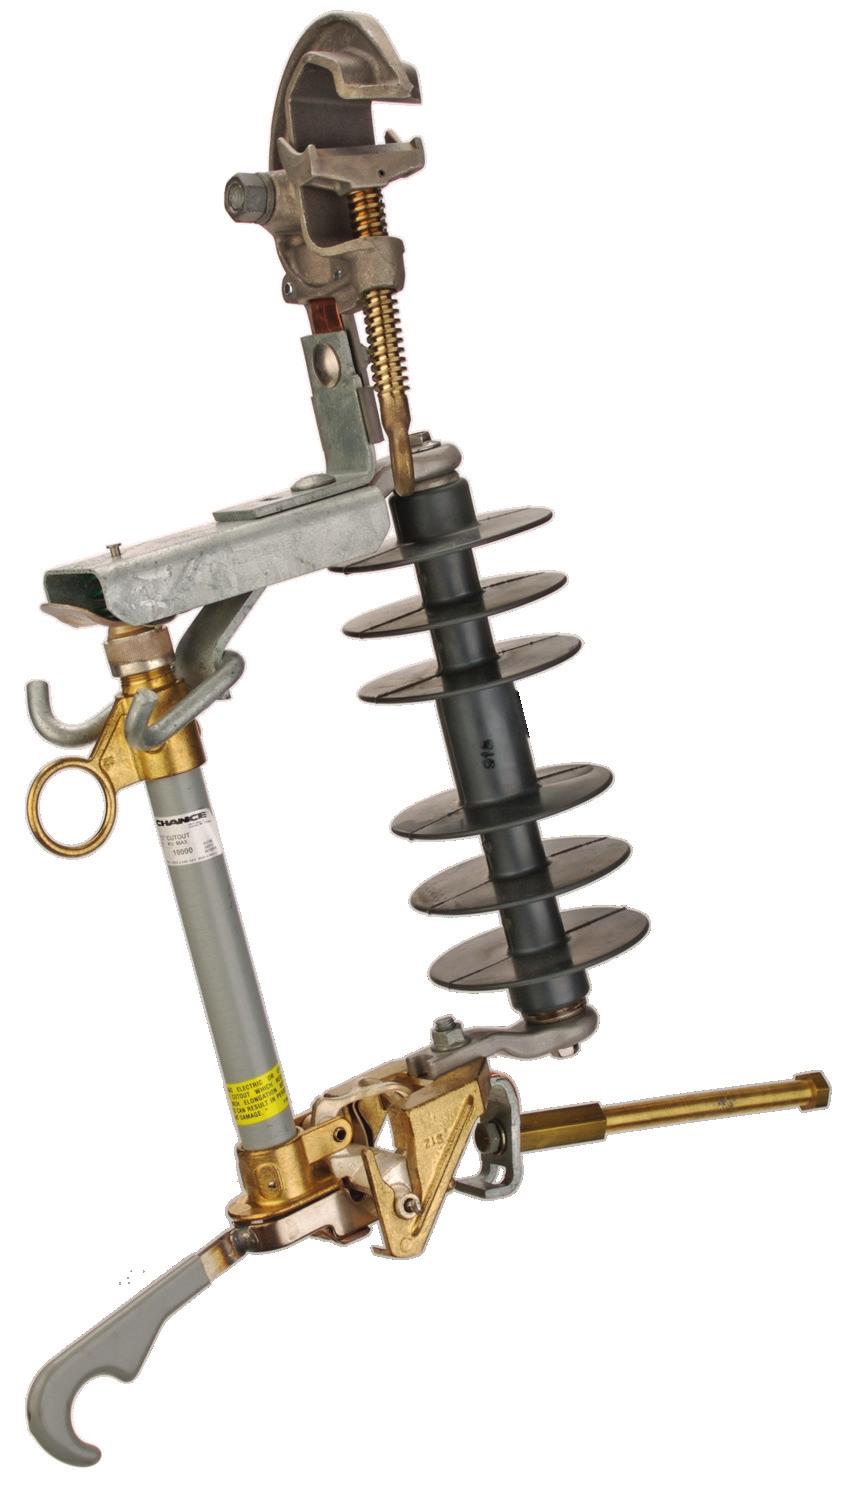 Temporary Cutout Tools for 15kV and 27kV To provide fuse protection during live-line maintenance, temporary cutout tool simply clamps onto primary conductor with a